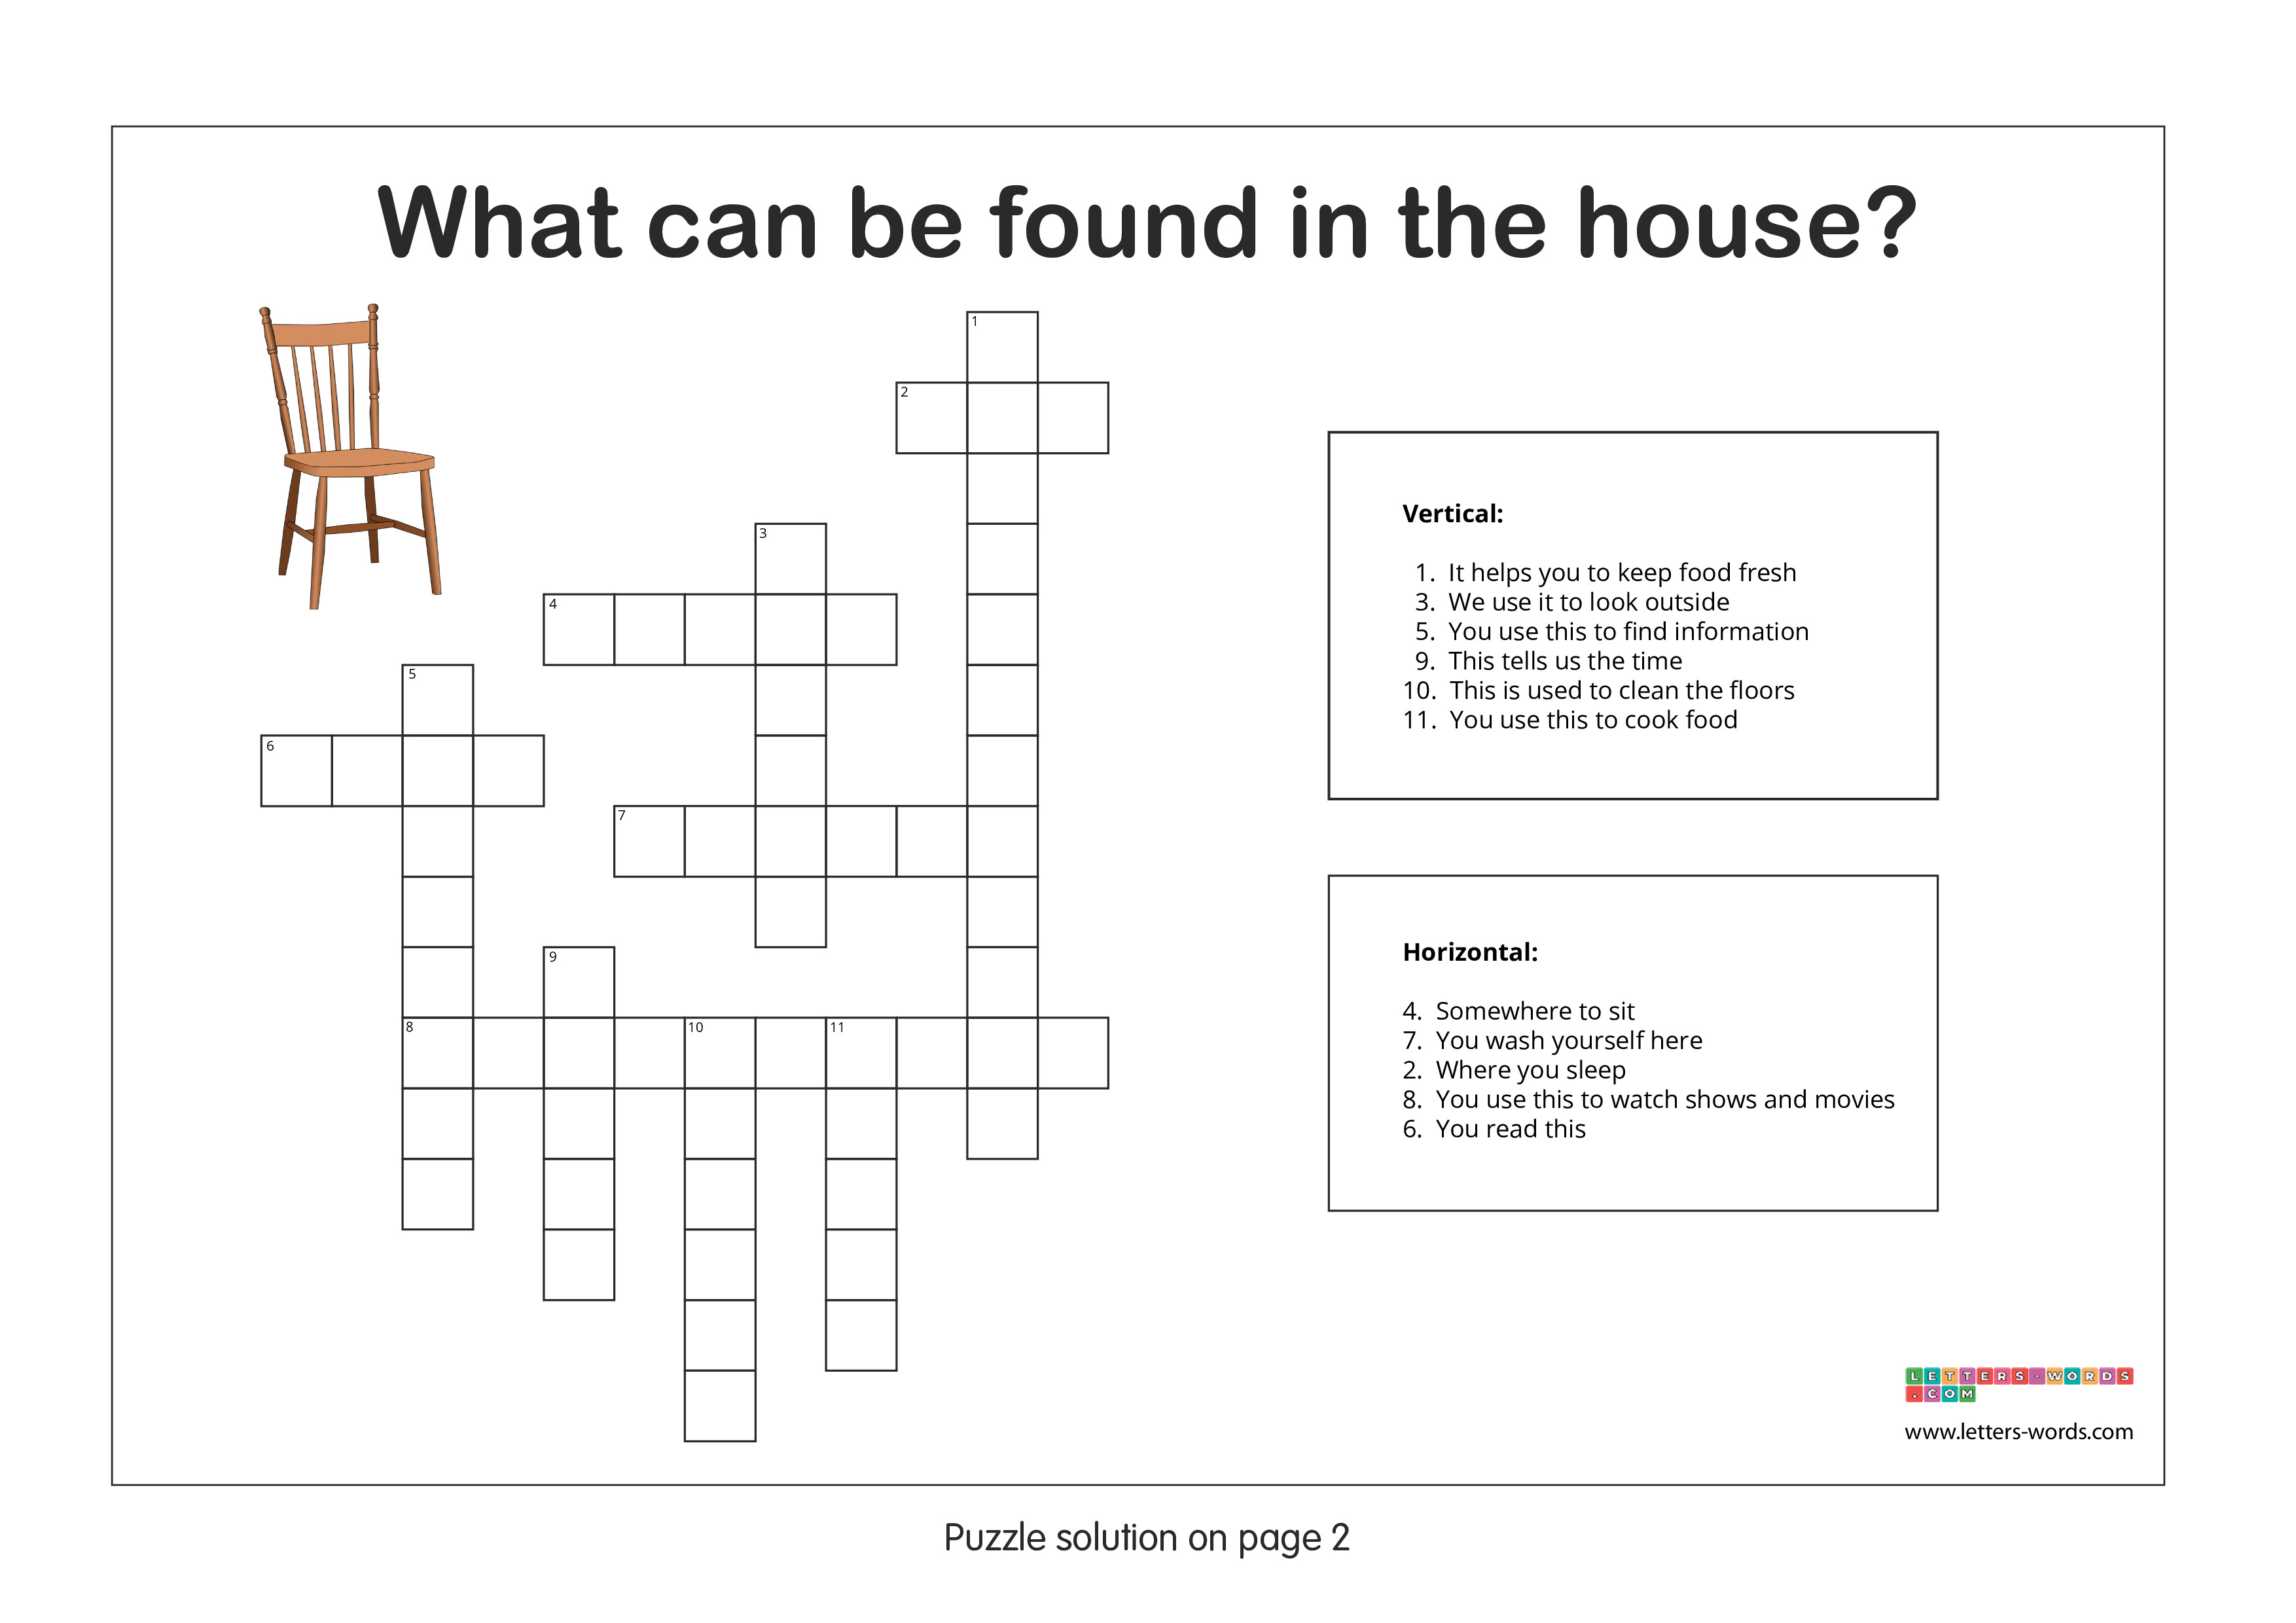 Elementary School Students Crossword Puzzle - What can be found in the house?